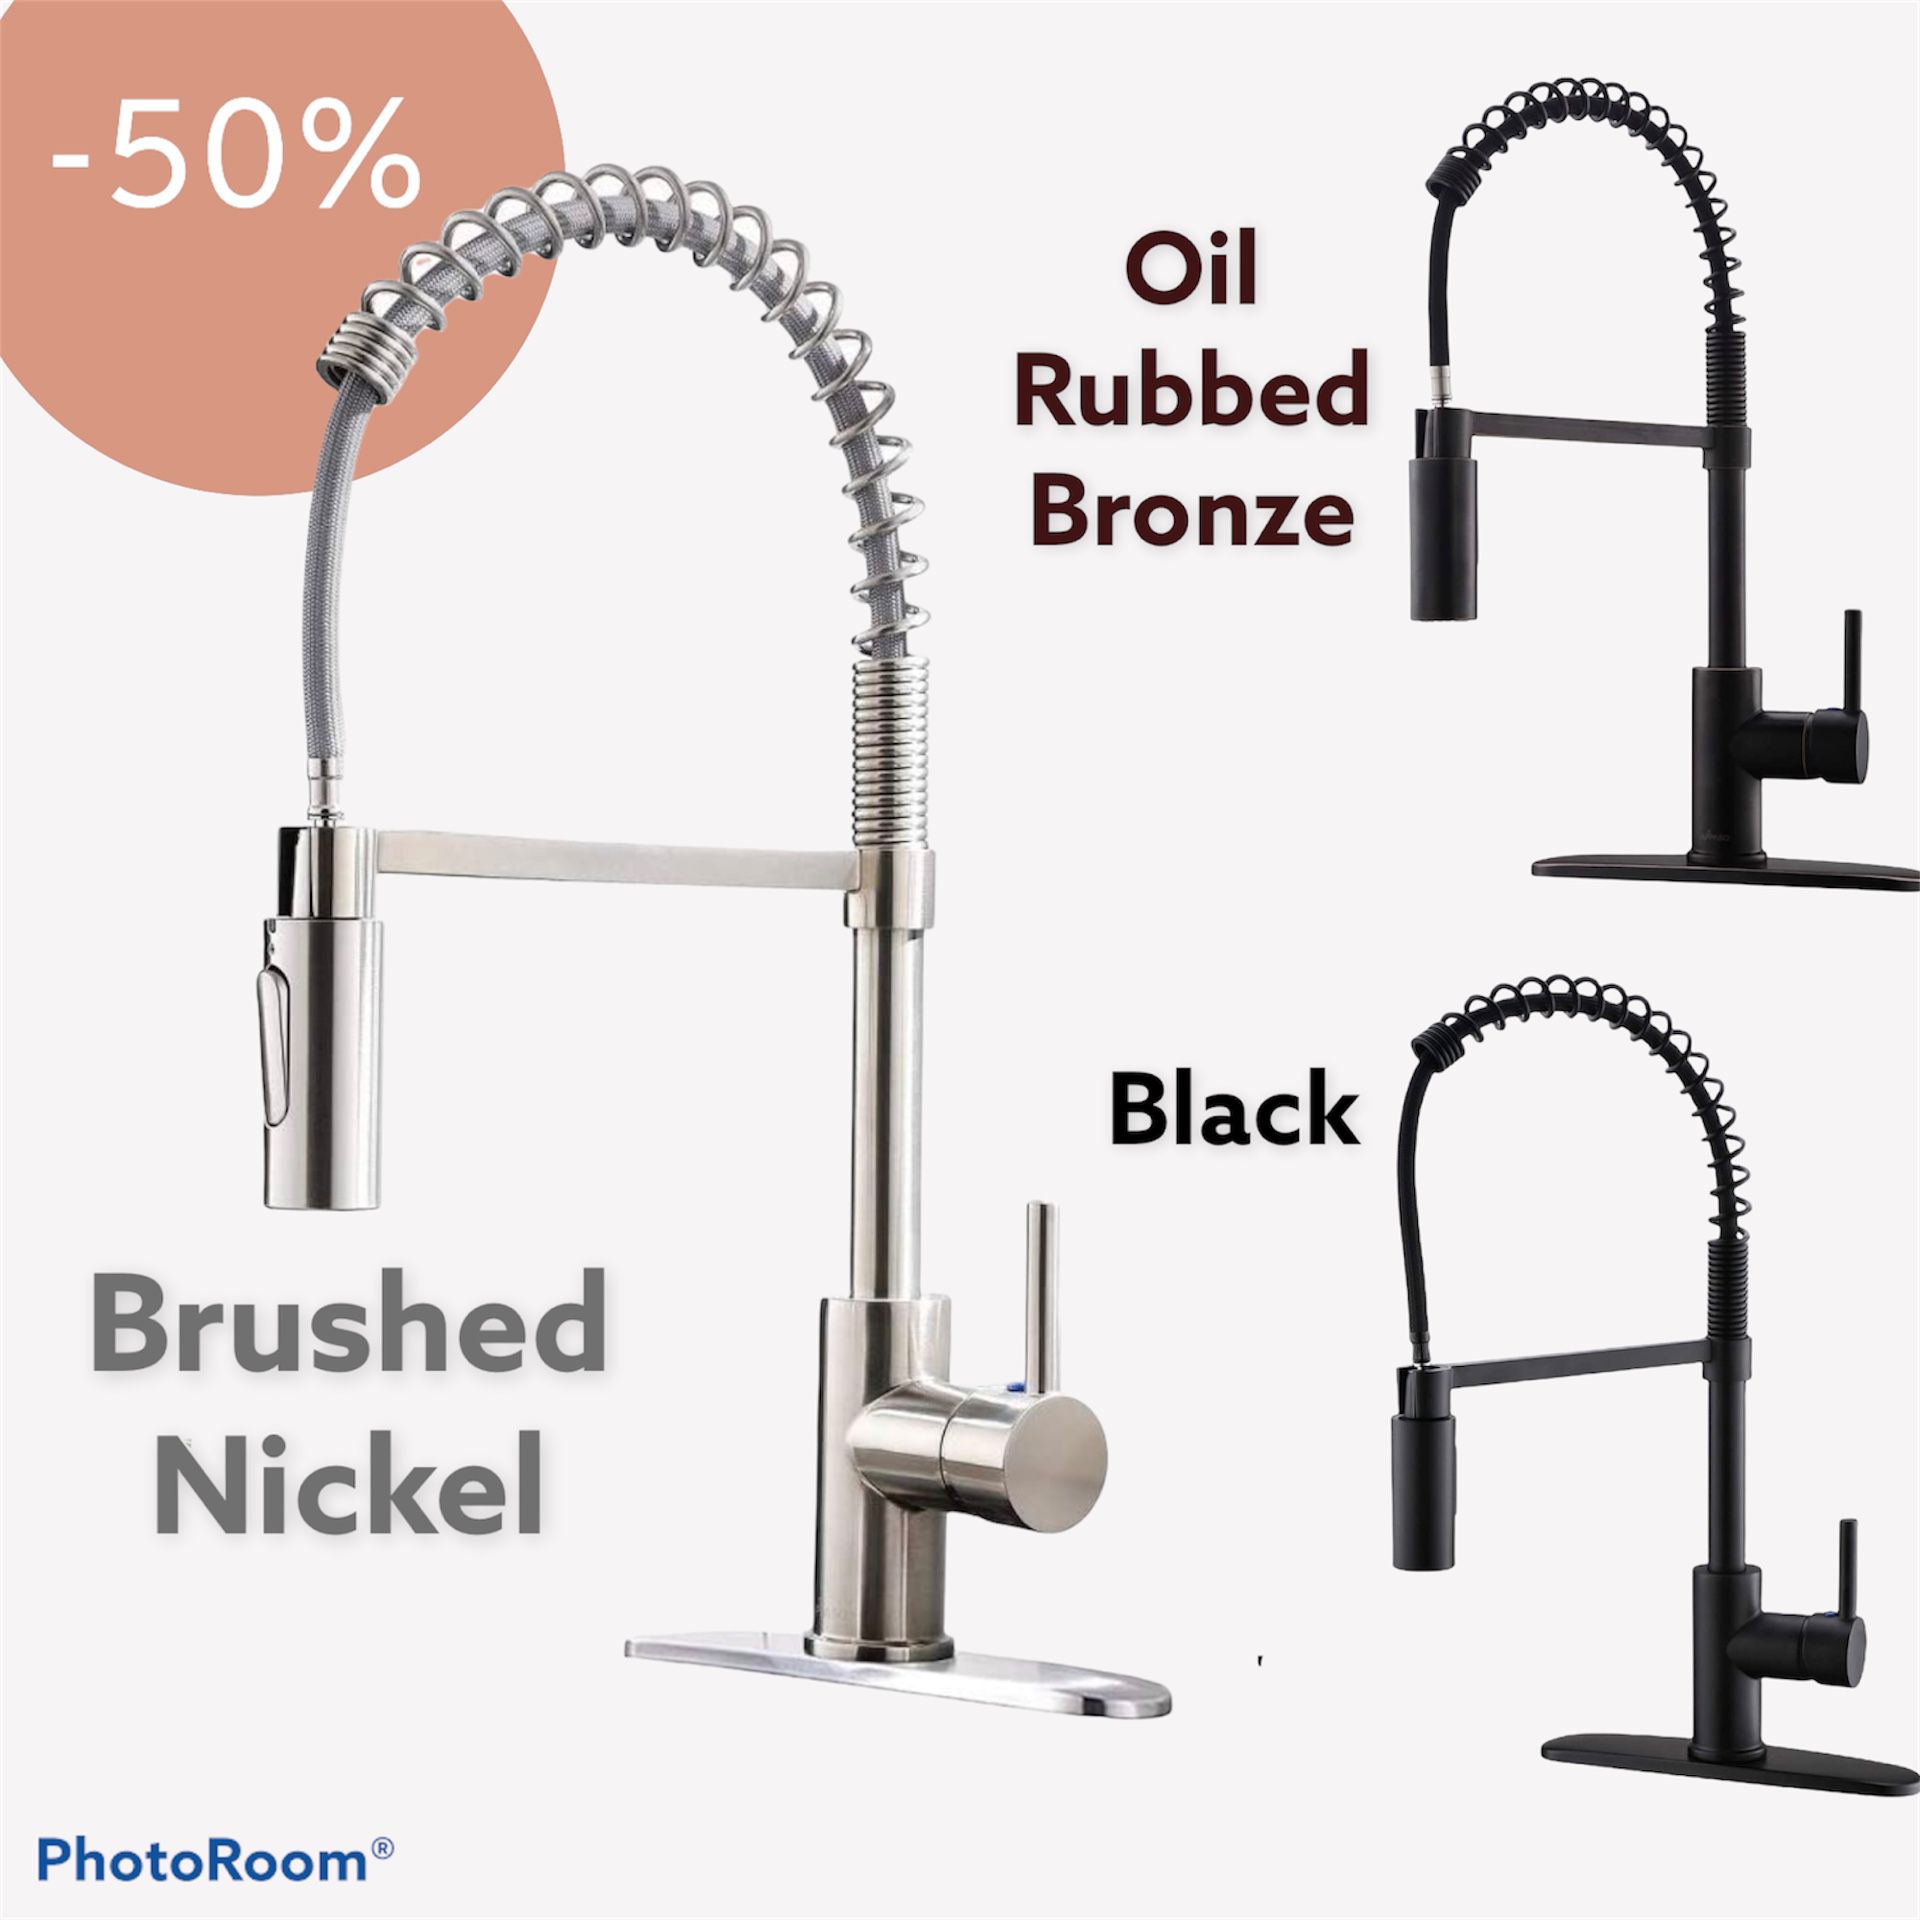 New kitchen faucet 3 finishes available- commercial style-Brushed Nickel/Oil Rubbed Bronze/Black-Brushed Nickel